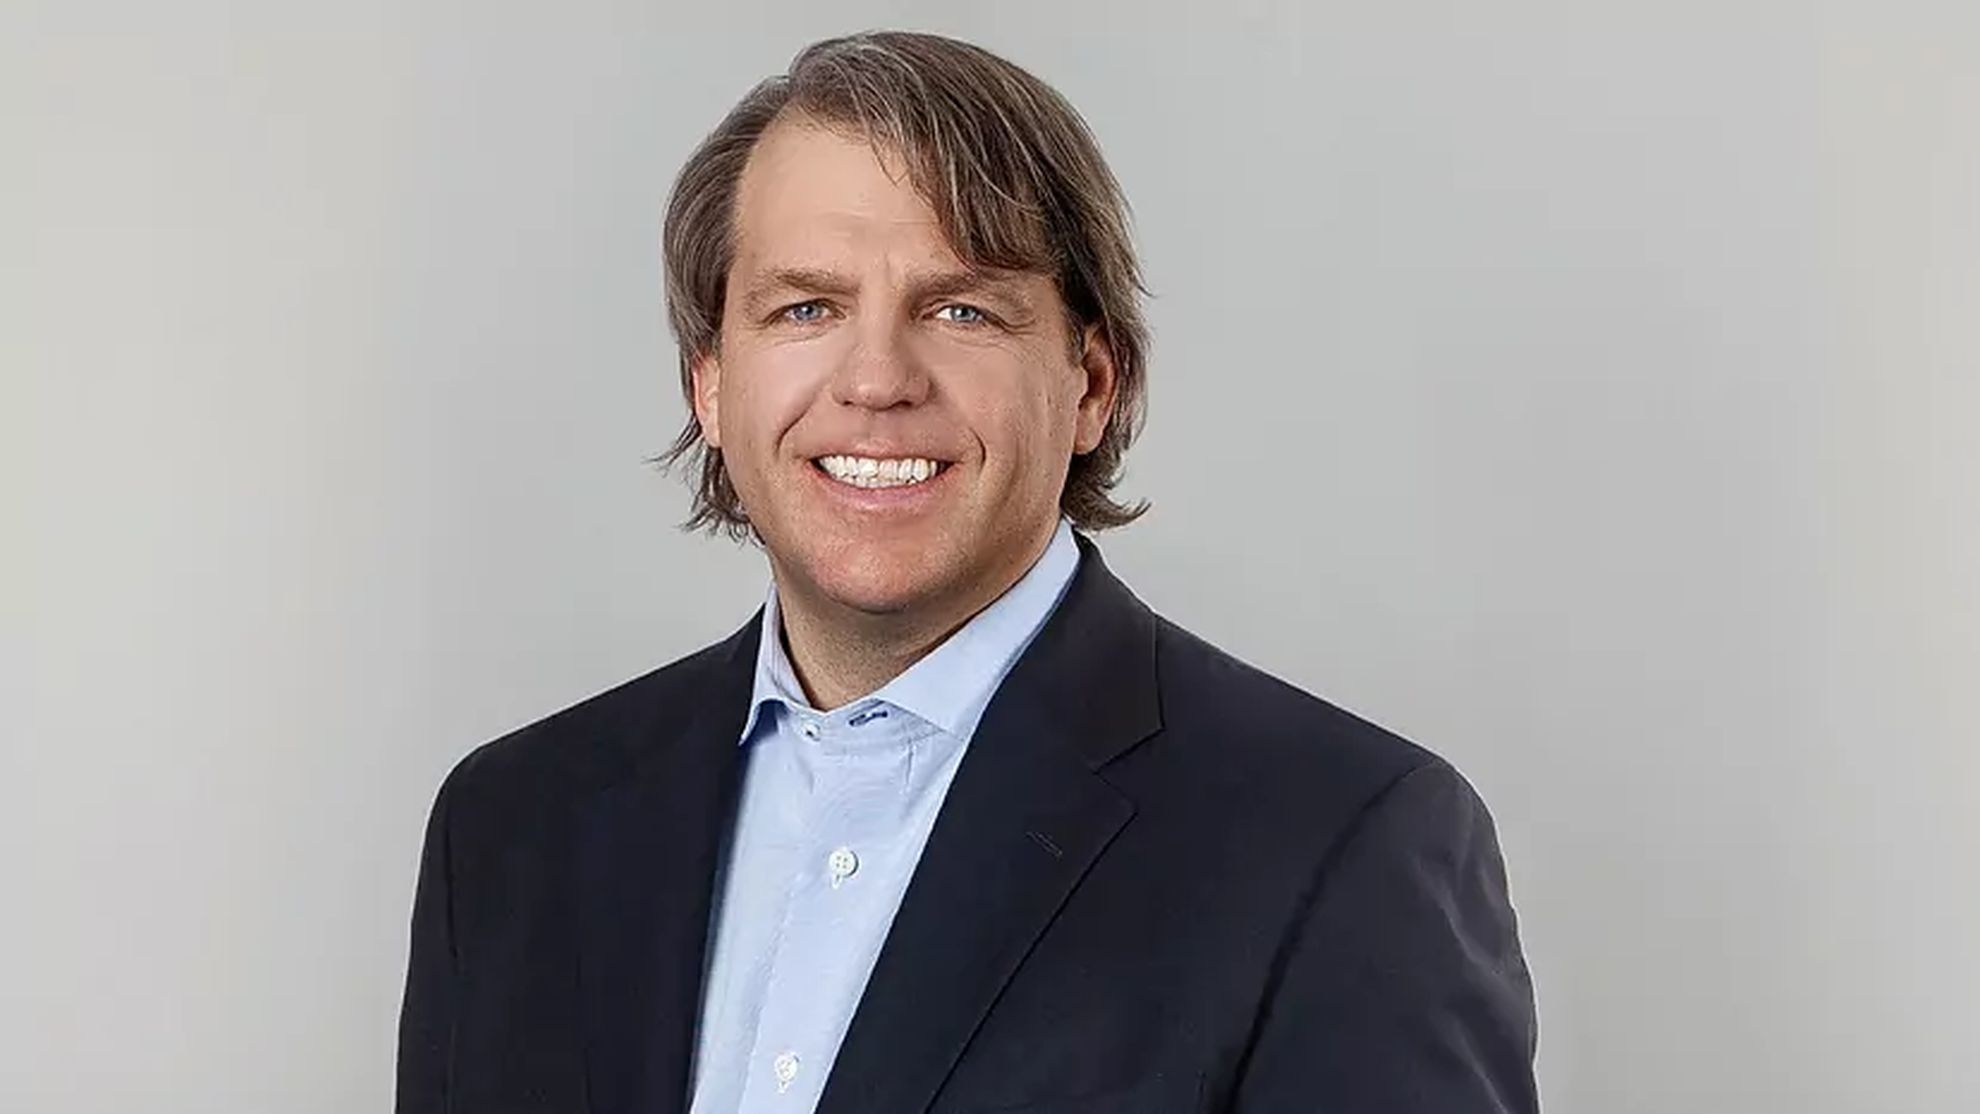 Who is Todd Boehly, the new owner of Chelsea? Marca